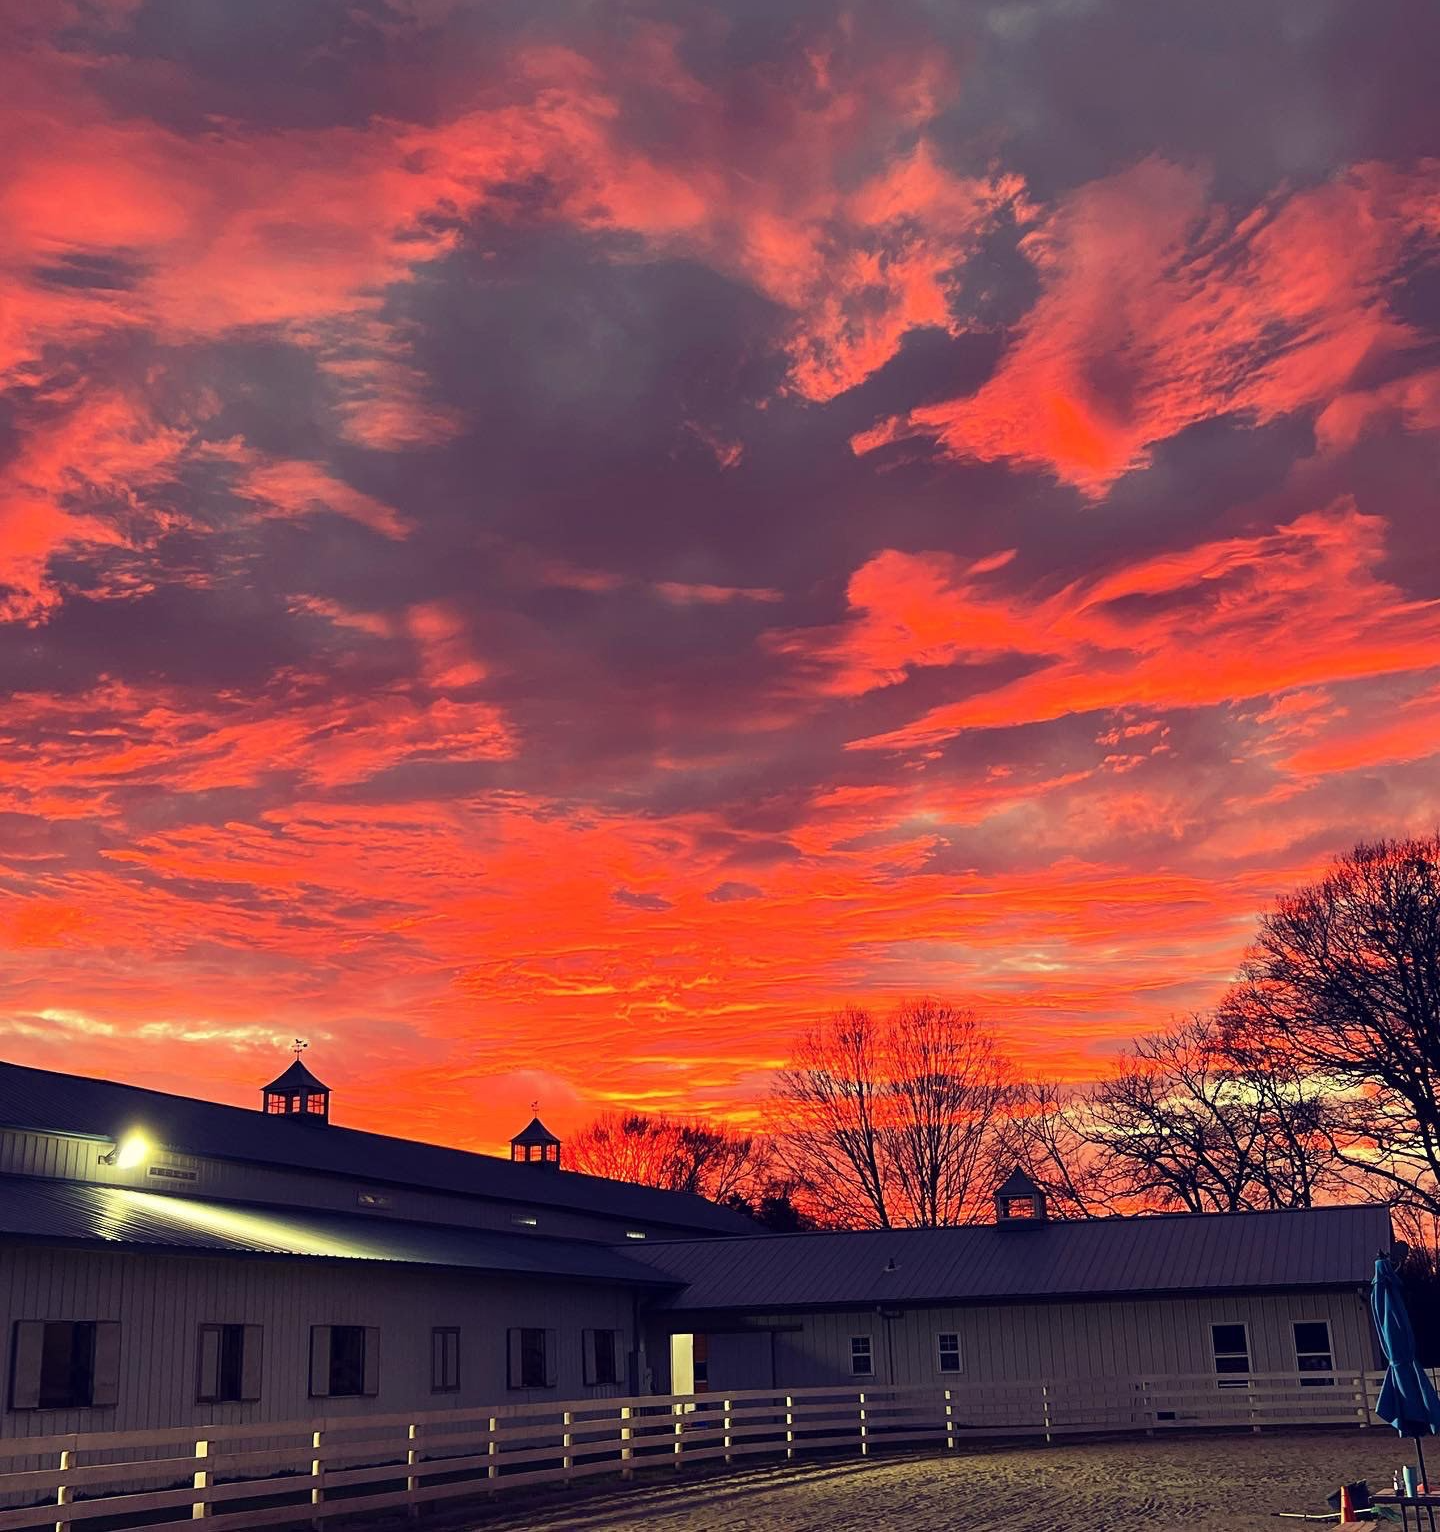 photo of Lenux Stables main barn and outdoor riding arena, with beautiful fiery sunset in background